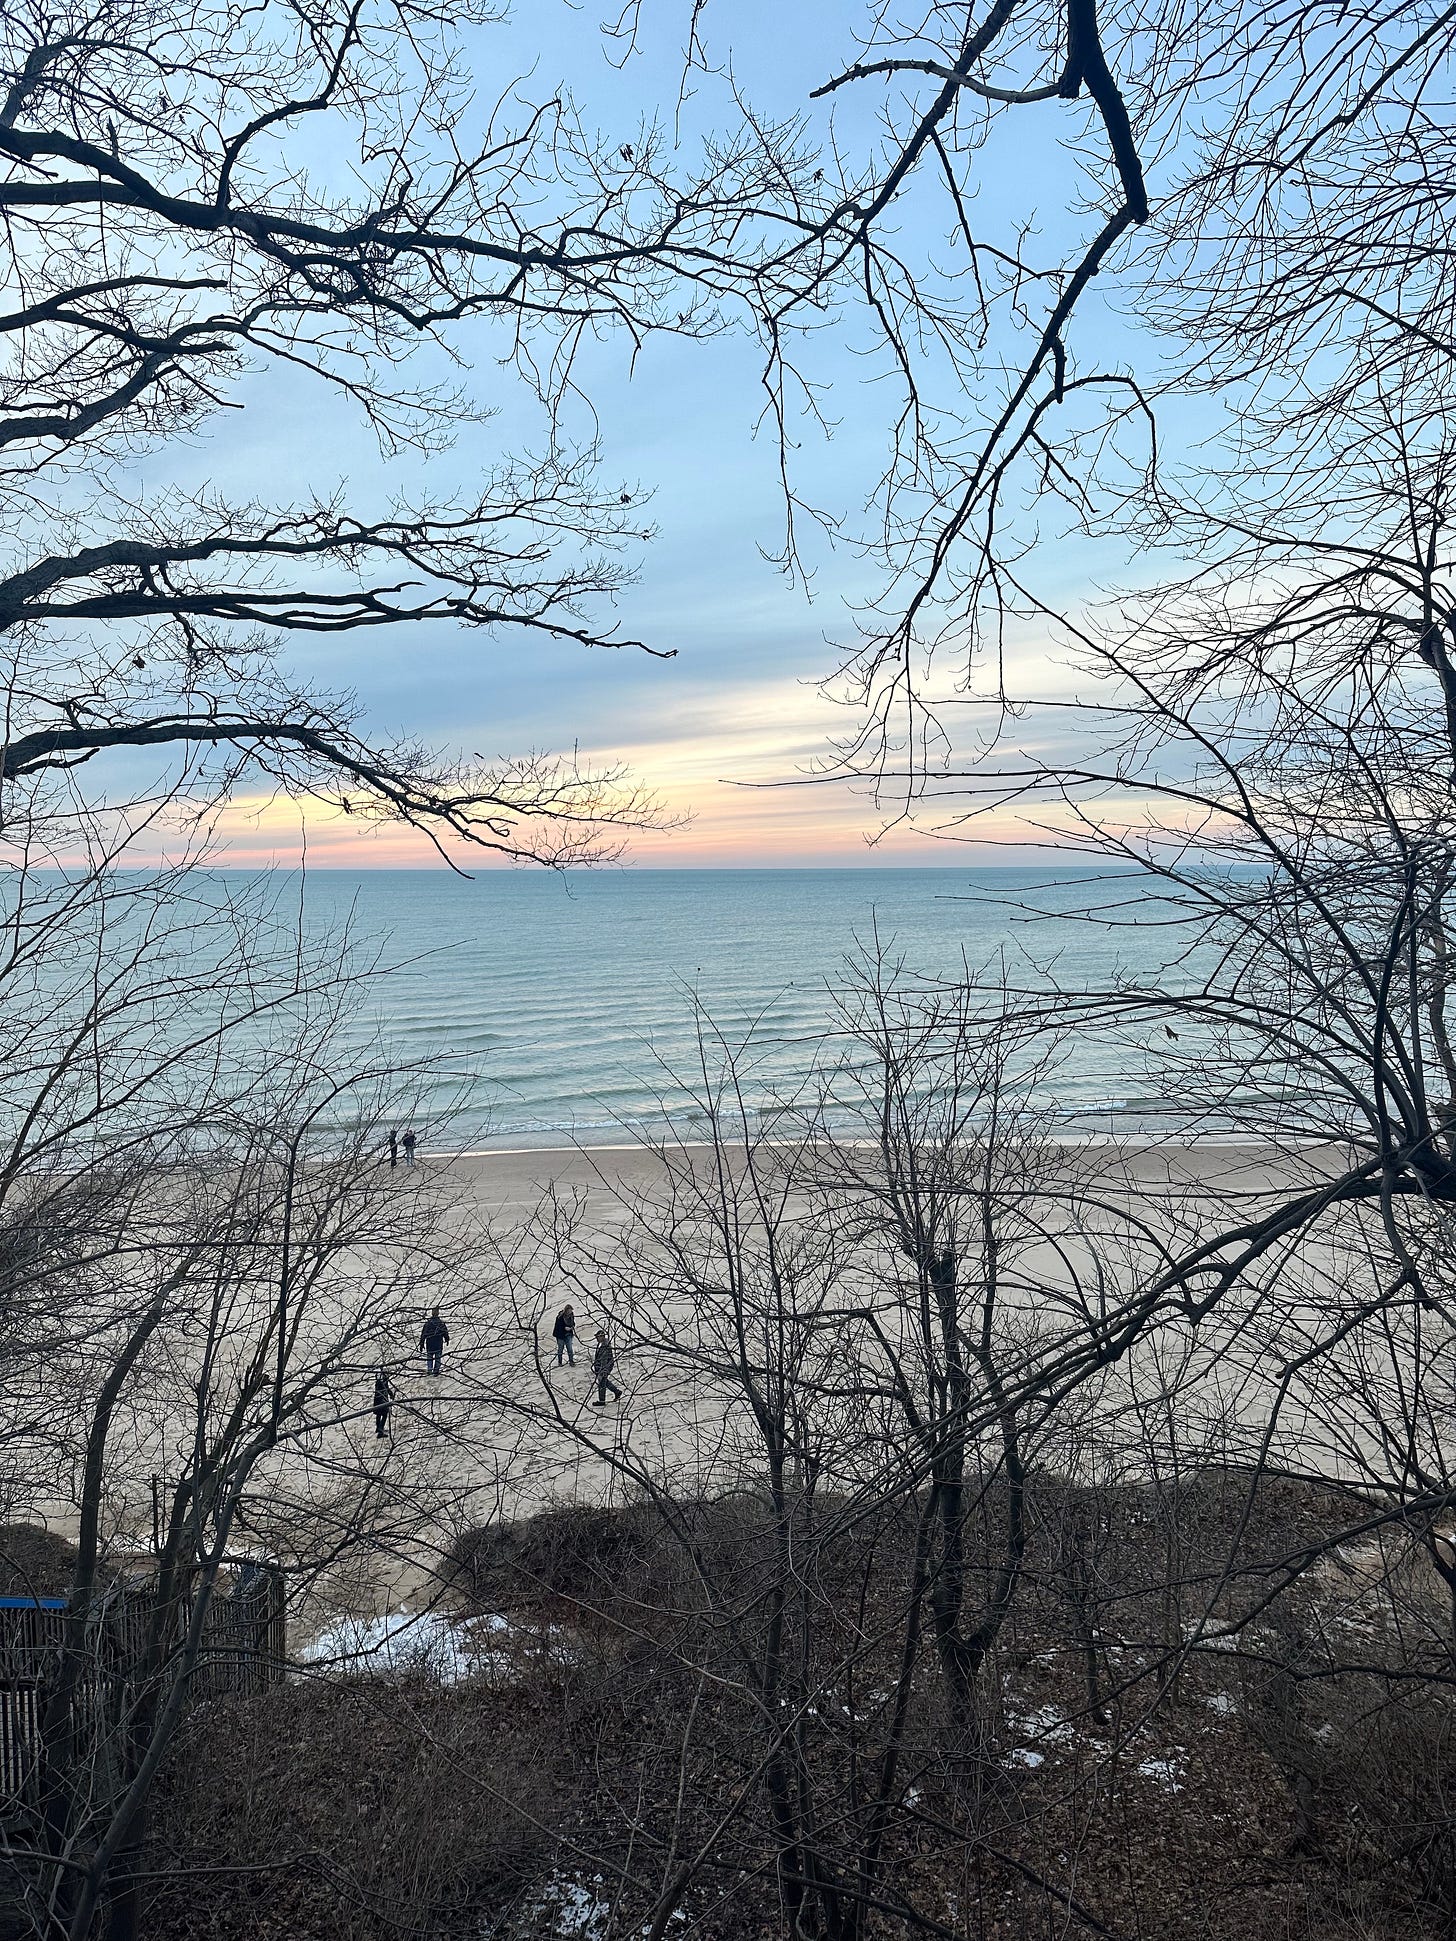 Strangers standing on the beach of Lake Michigan, seen through tree branches.